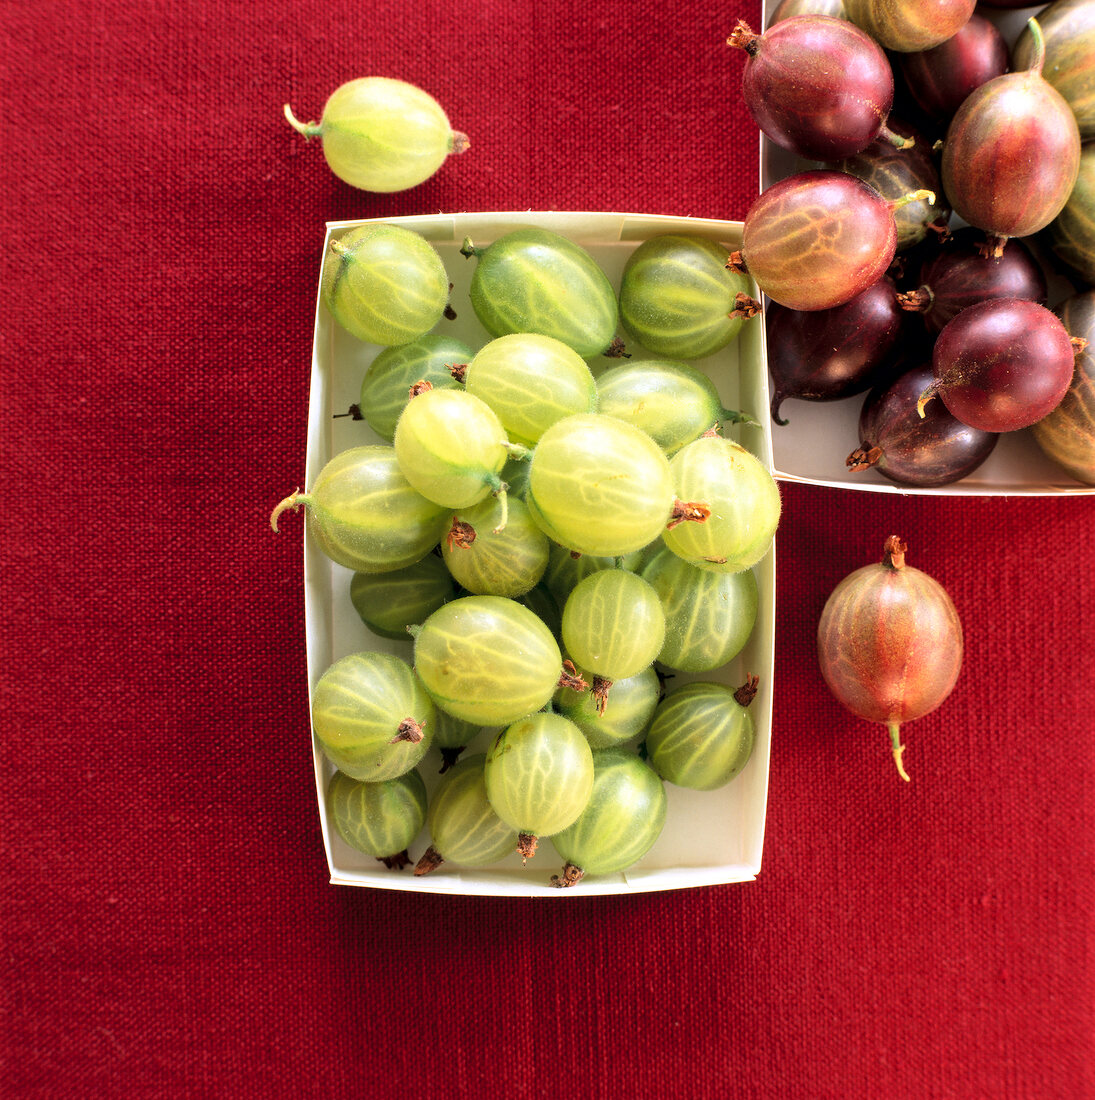 Close-up of red and green gooseberries in boxes